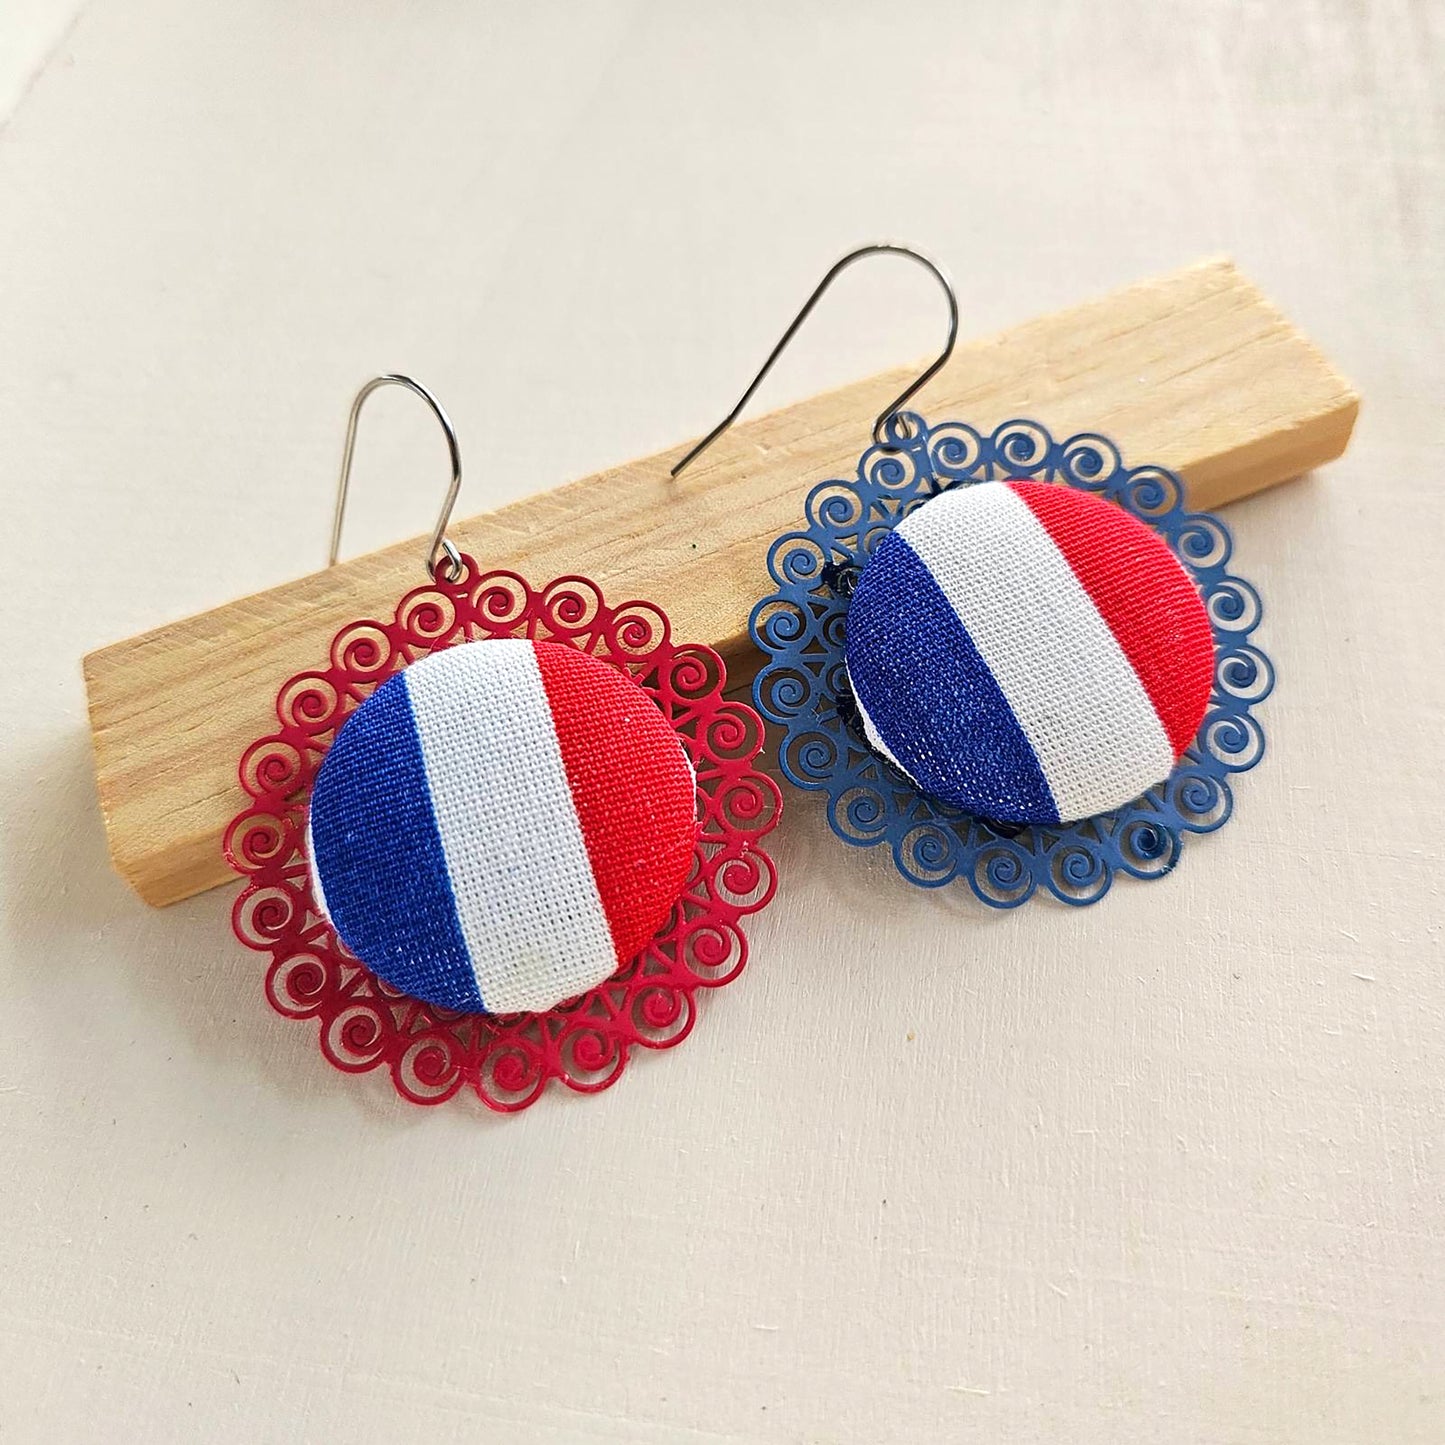 "Embrace Team Pride: Stylish French Flag Earrings for Olympics"